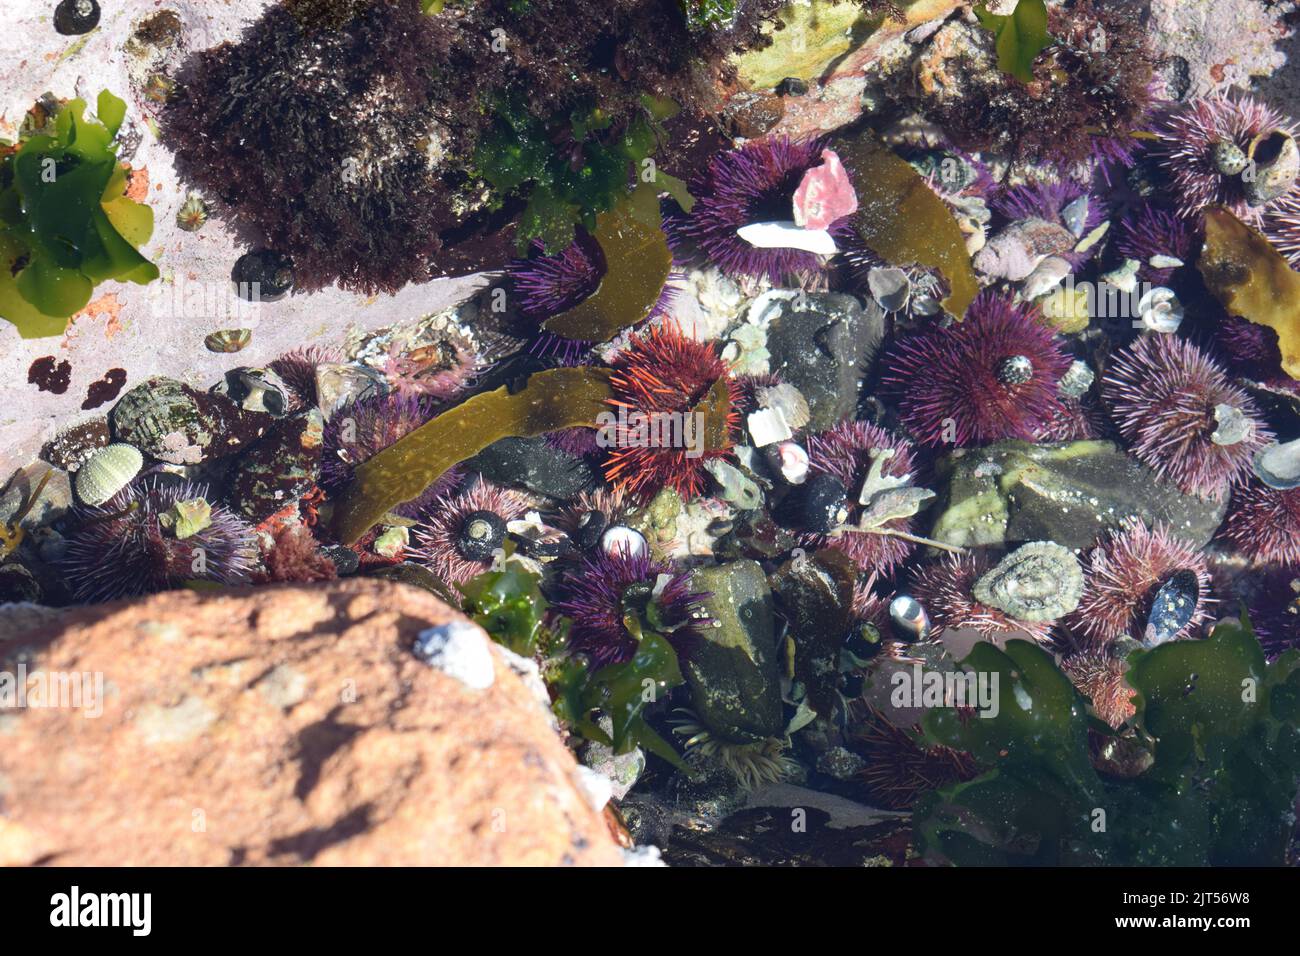 Colorful marine life, shells, urchins and  anemones under the water as if you can touch them without getting your hand wet. Stock Photo